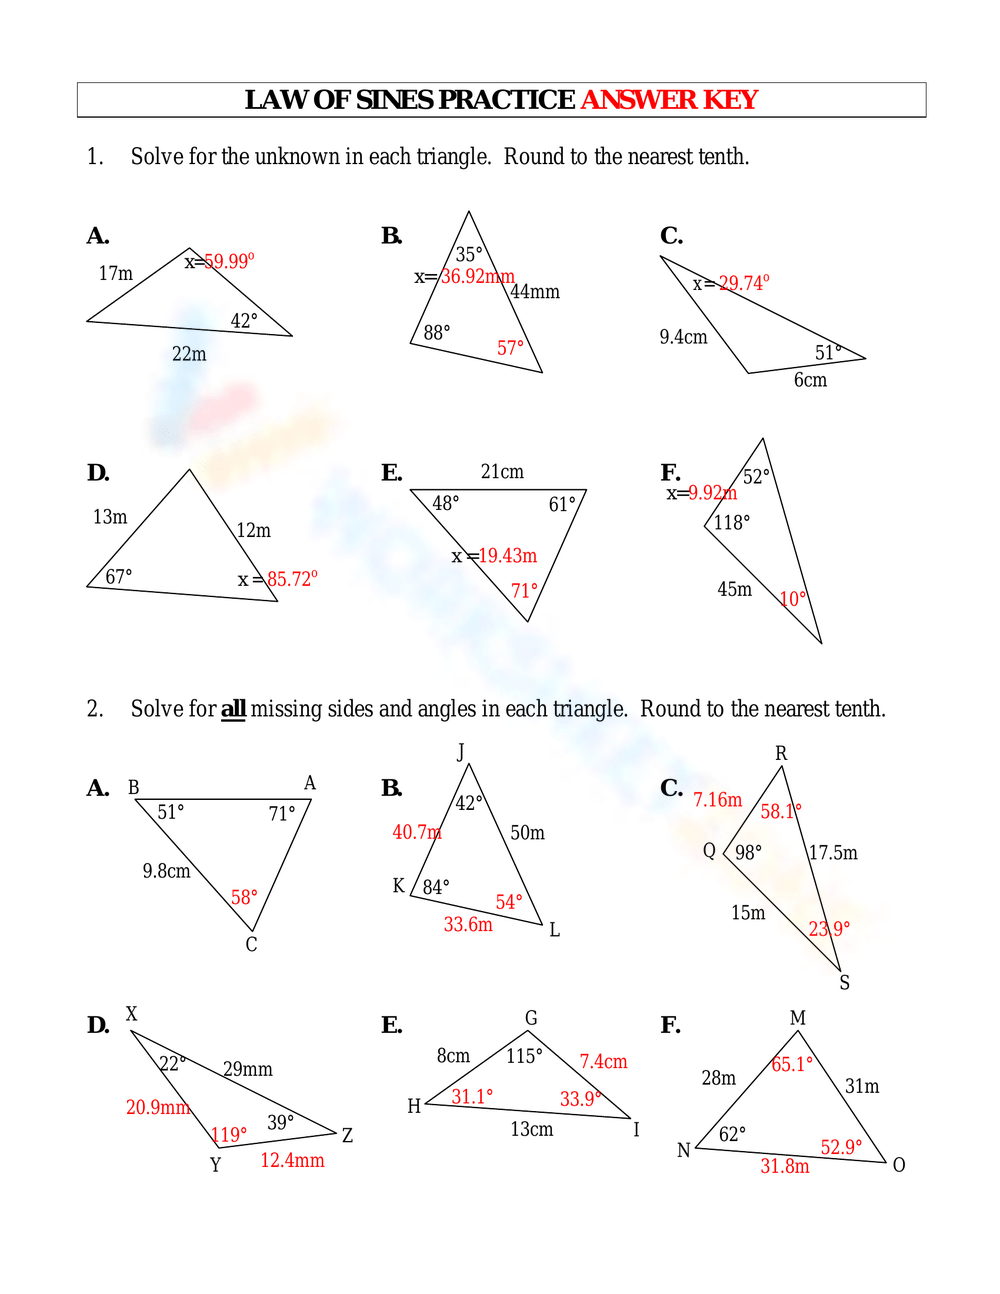 law of sines corrective assignment answers